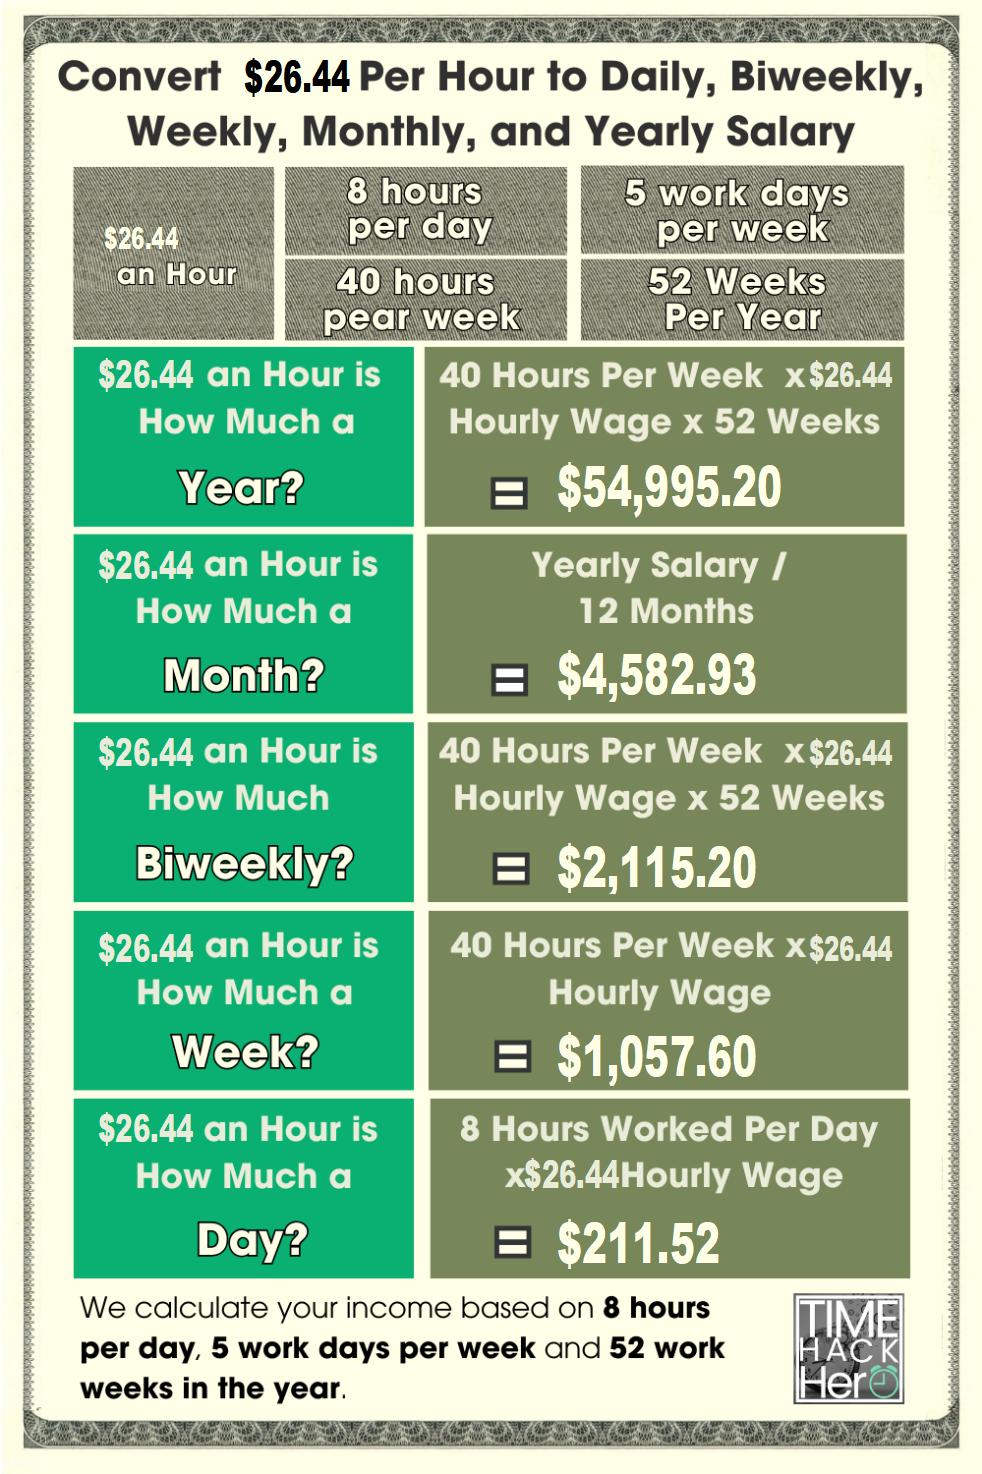 Convert $26.44 Per Hour to Weekly, Monthly, and Yearly Salary